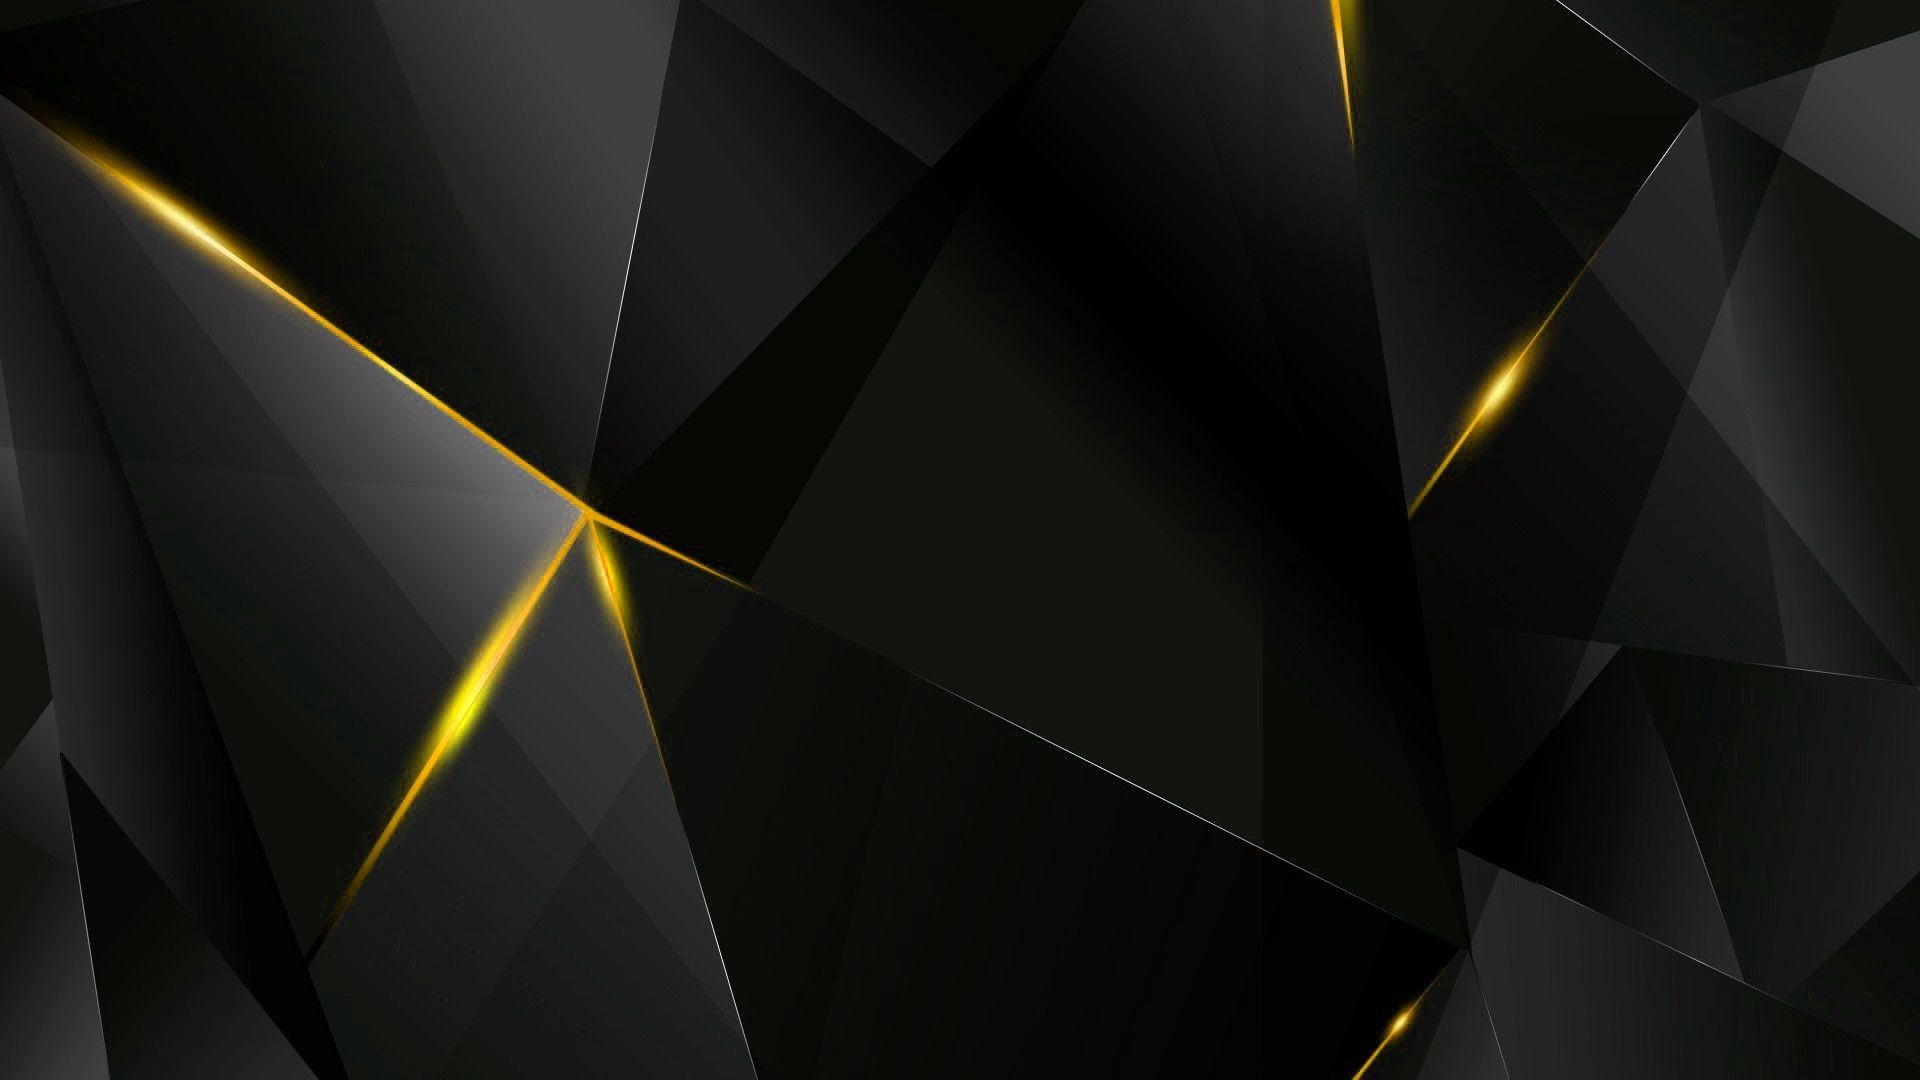 Black and Yellow Wallpapers - 4k, HD Black and Yellow Backgrounds on